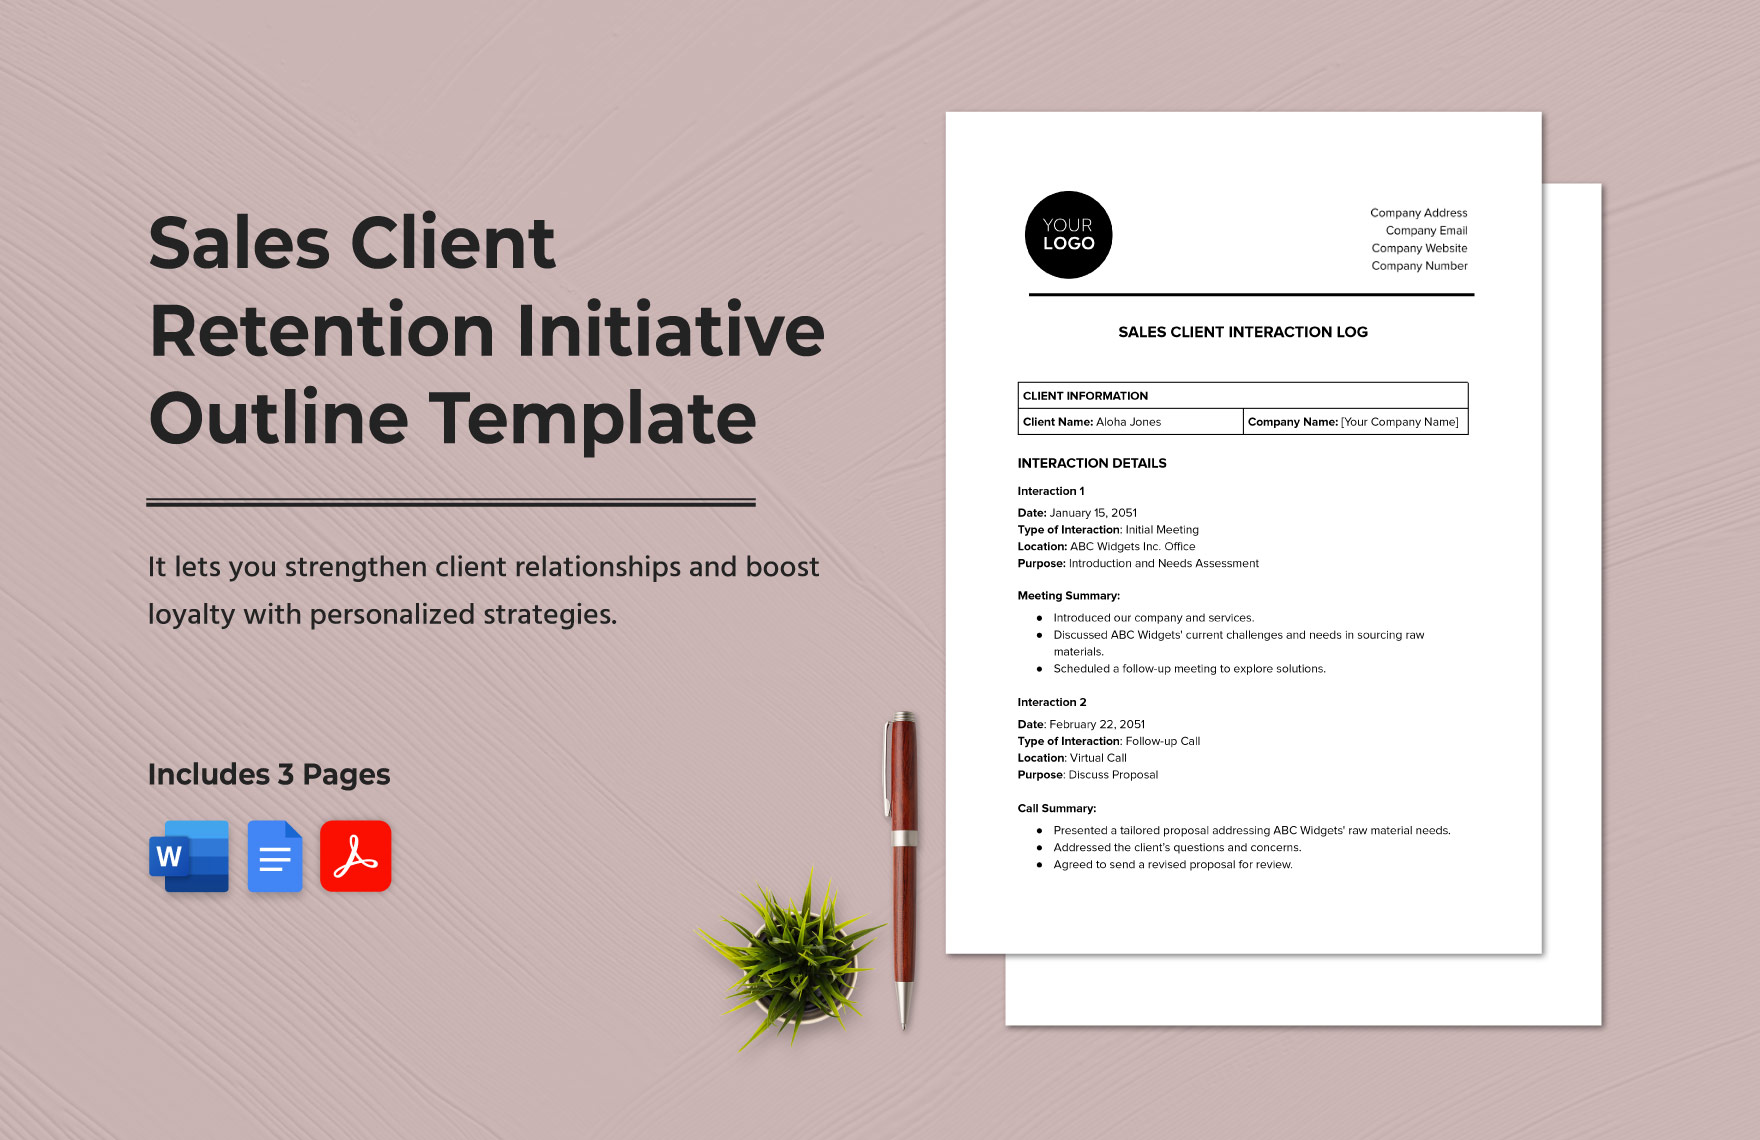 Sales Client Retention Initiative Outline Template in Word, Google Docs, PDF